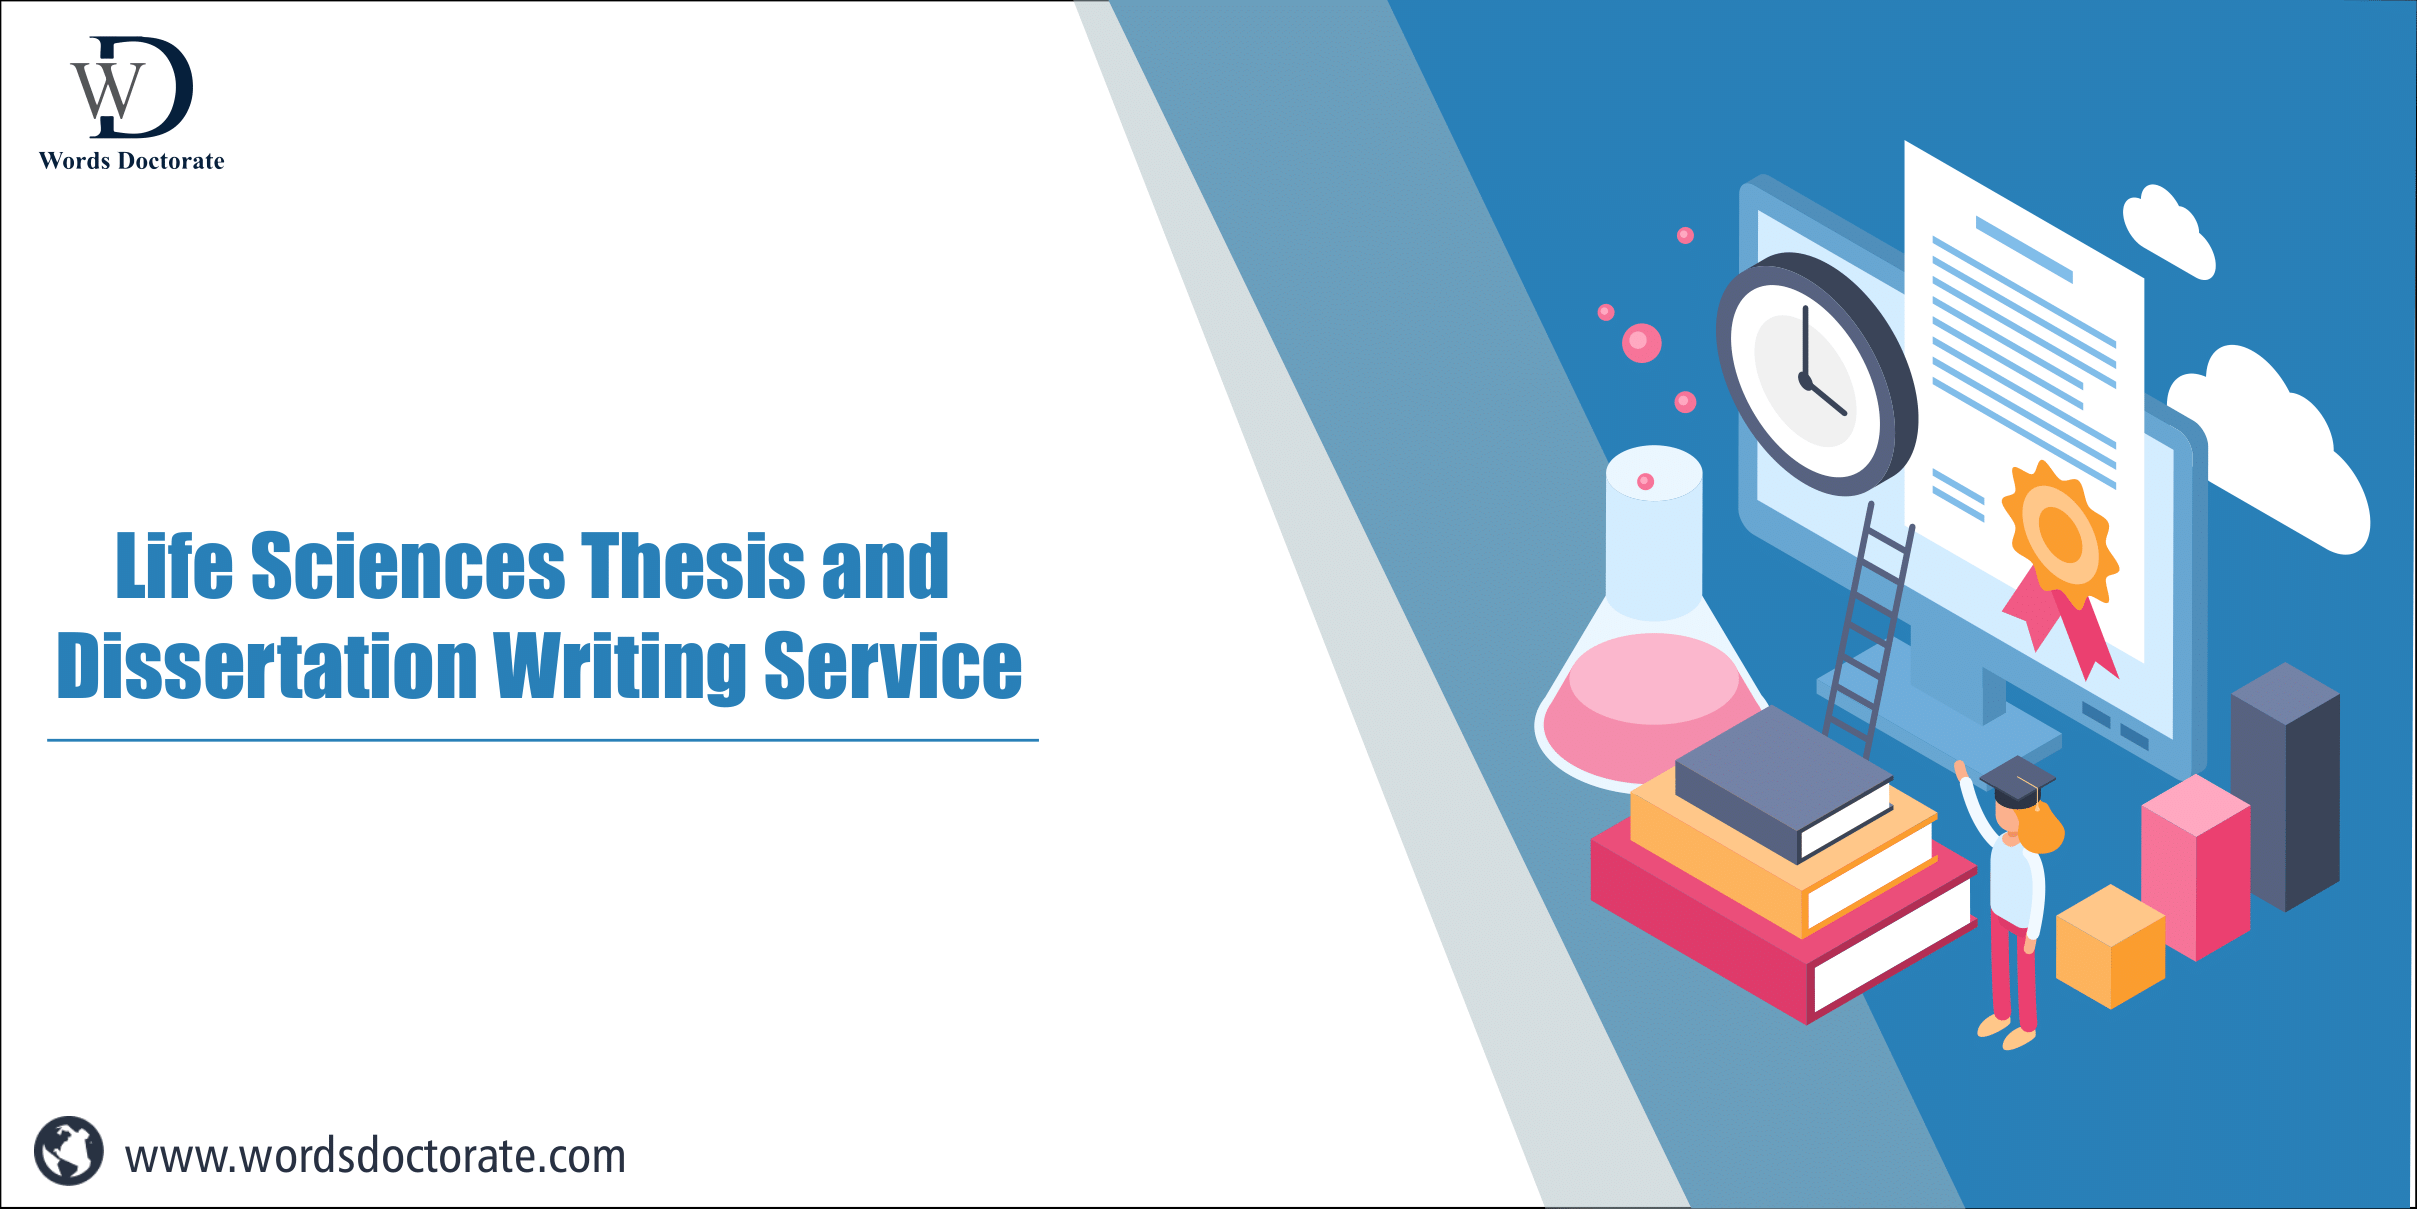 Life Sciences Thesis and Dissertation Writing Service